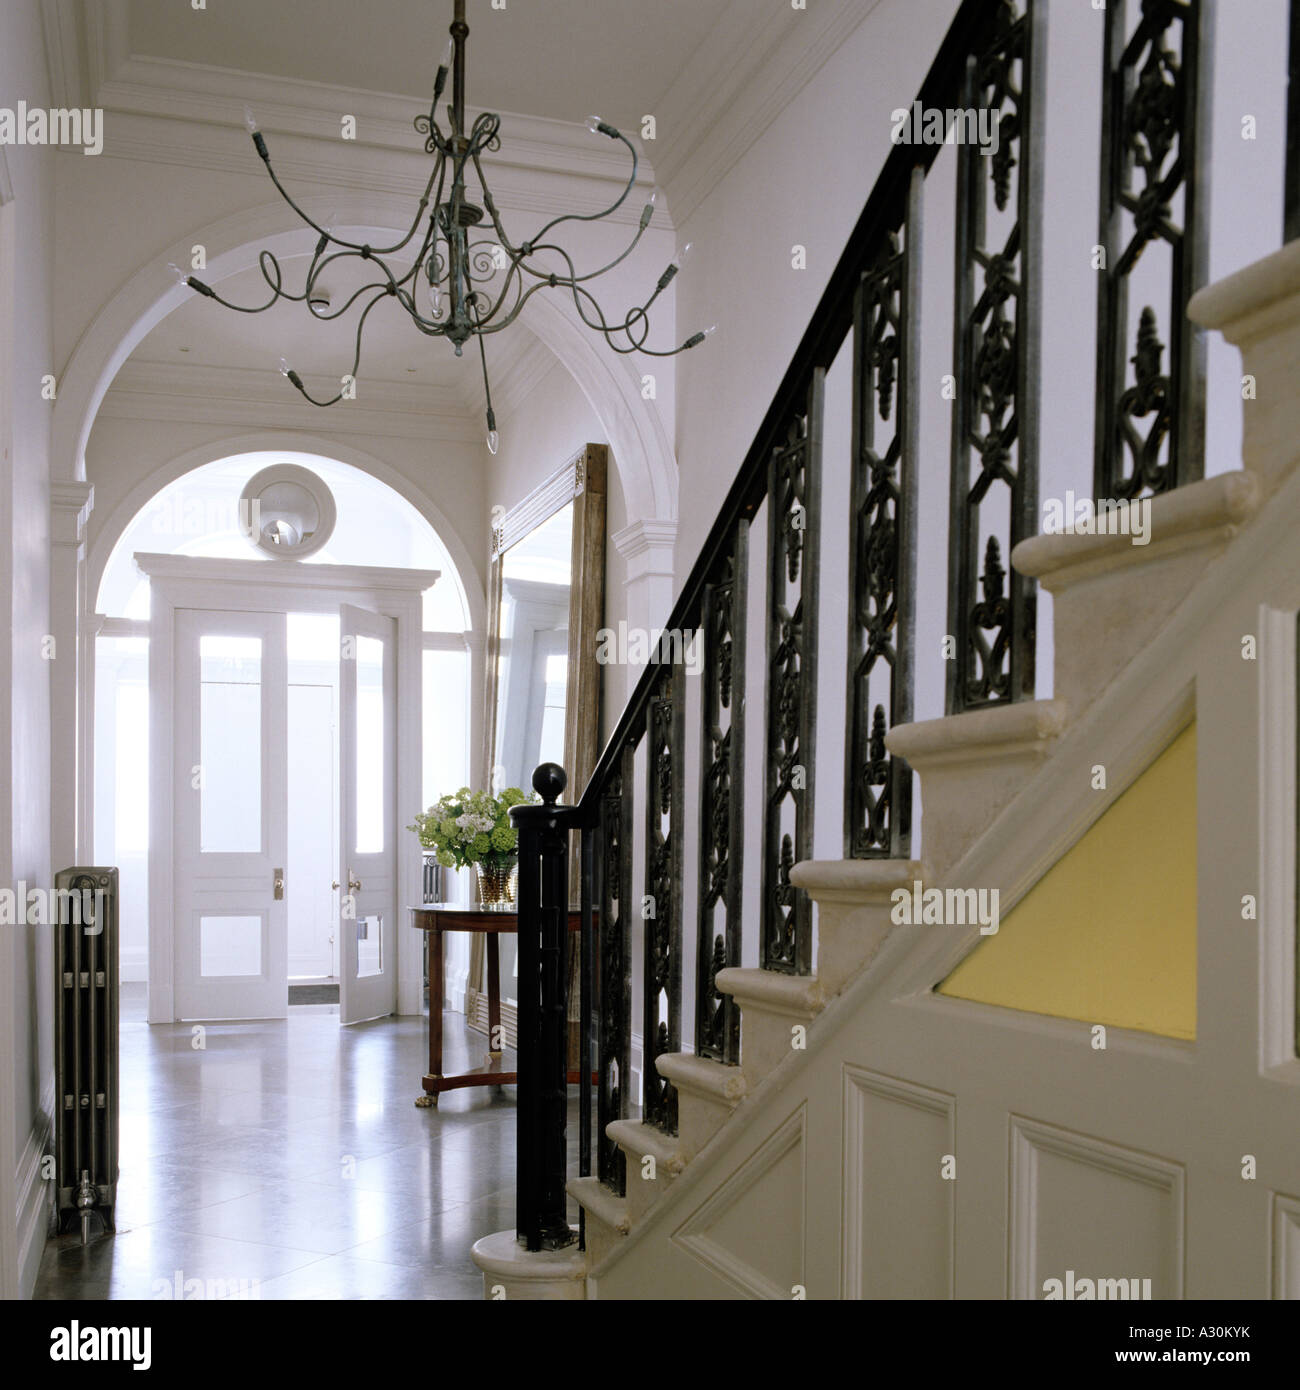 Entrance hallway and staircase of 1780’s London townhouse Stock Photo